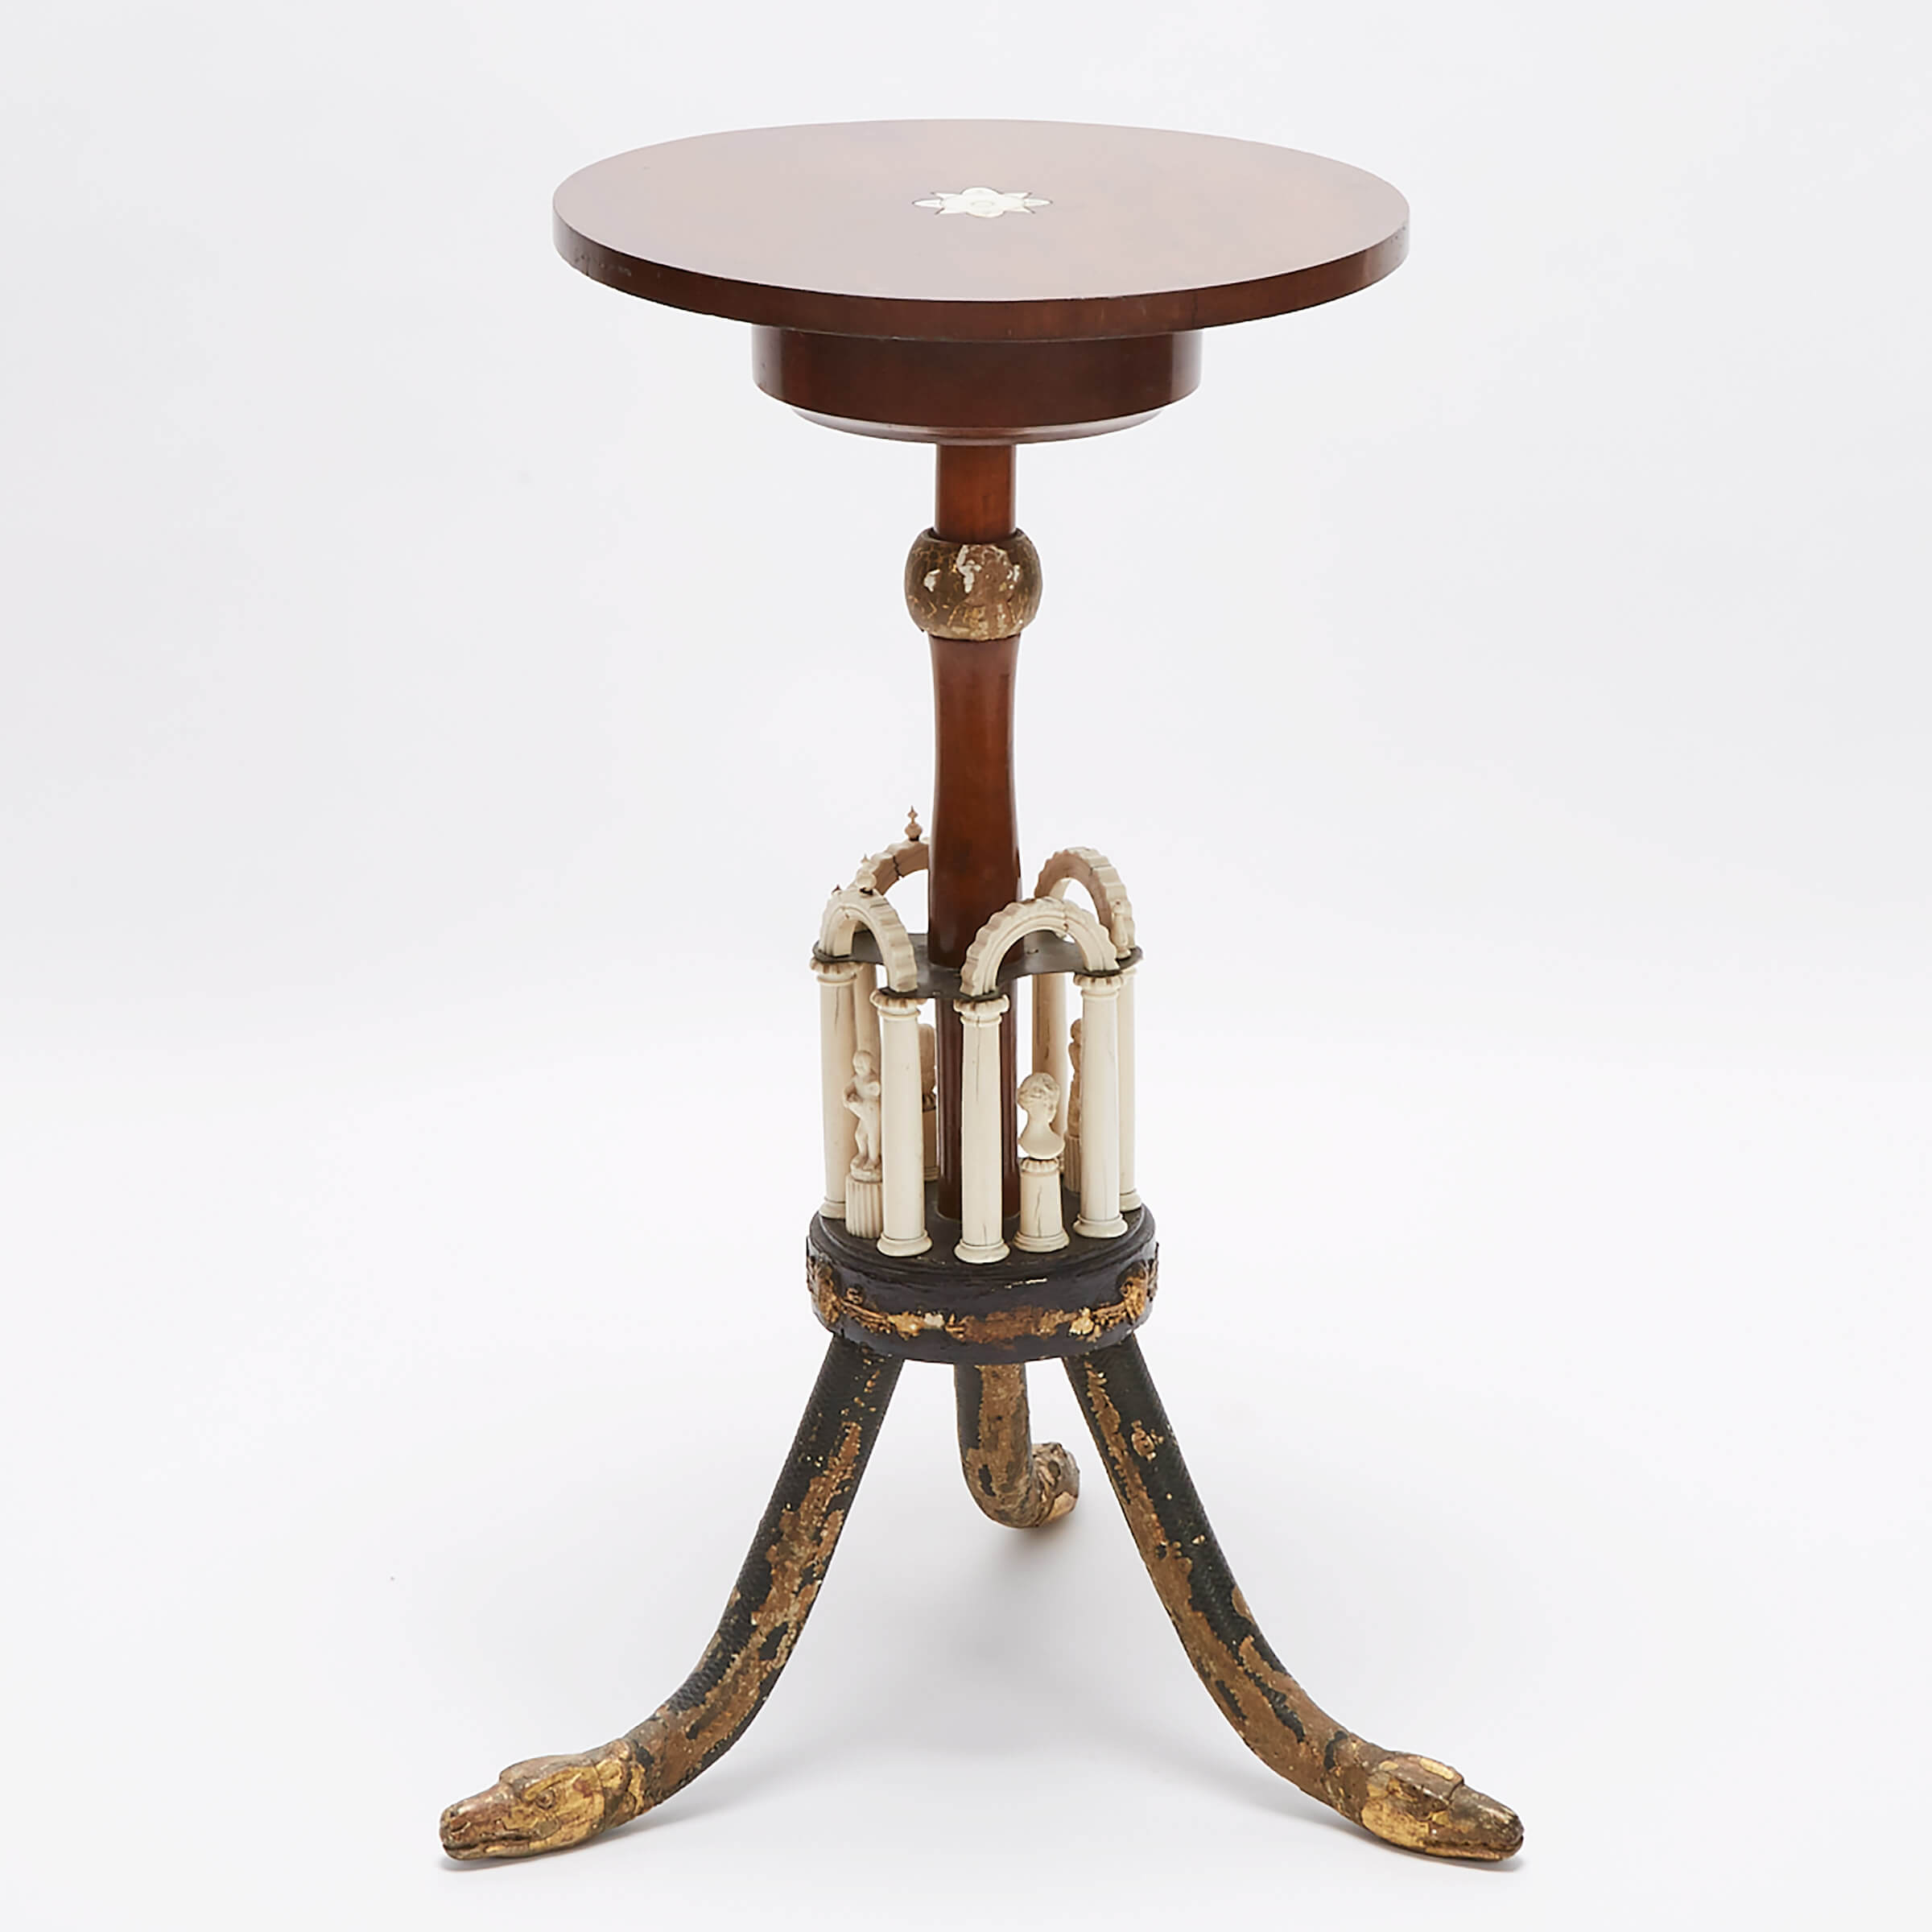 Unusual Continental Ivory Mounted Mahogany Work Table, mid 19th century